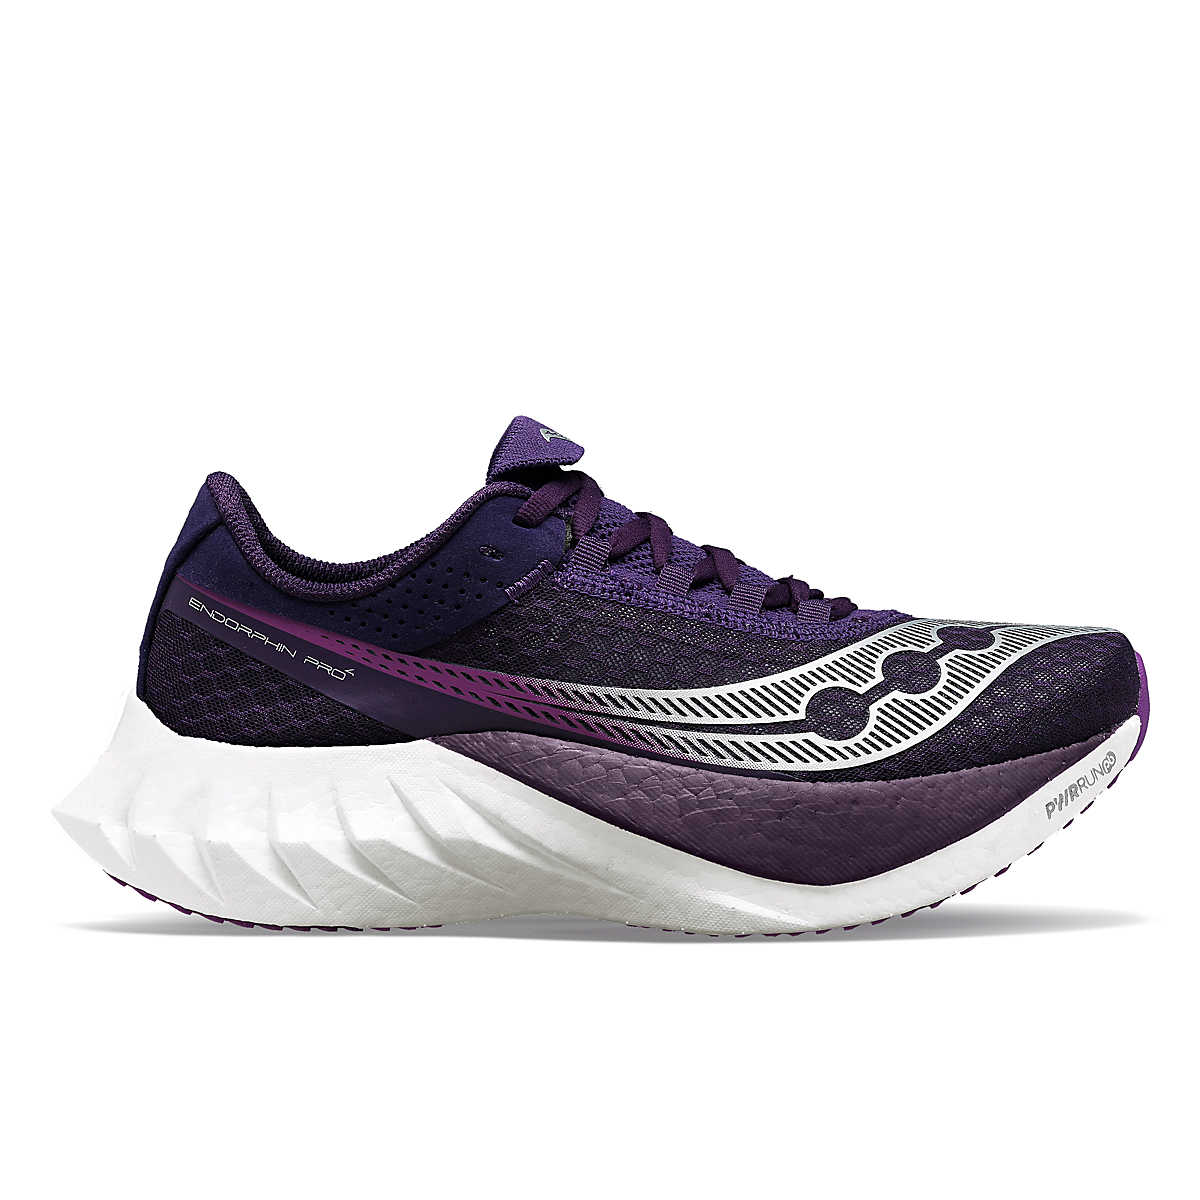 Women's Endorphin Pro 4 - Cavern and Violet